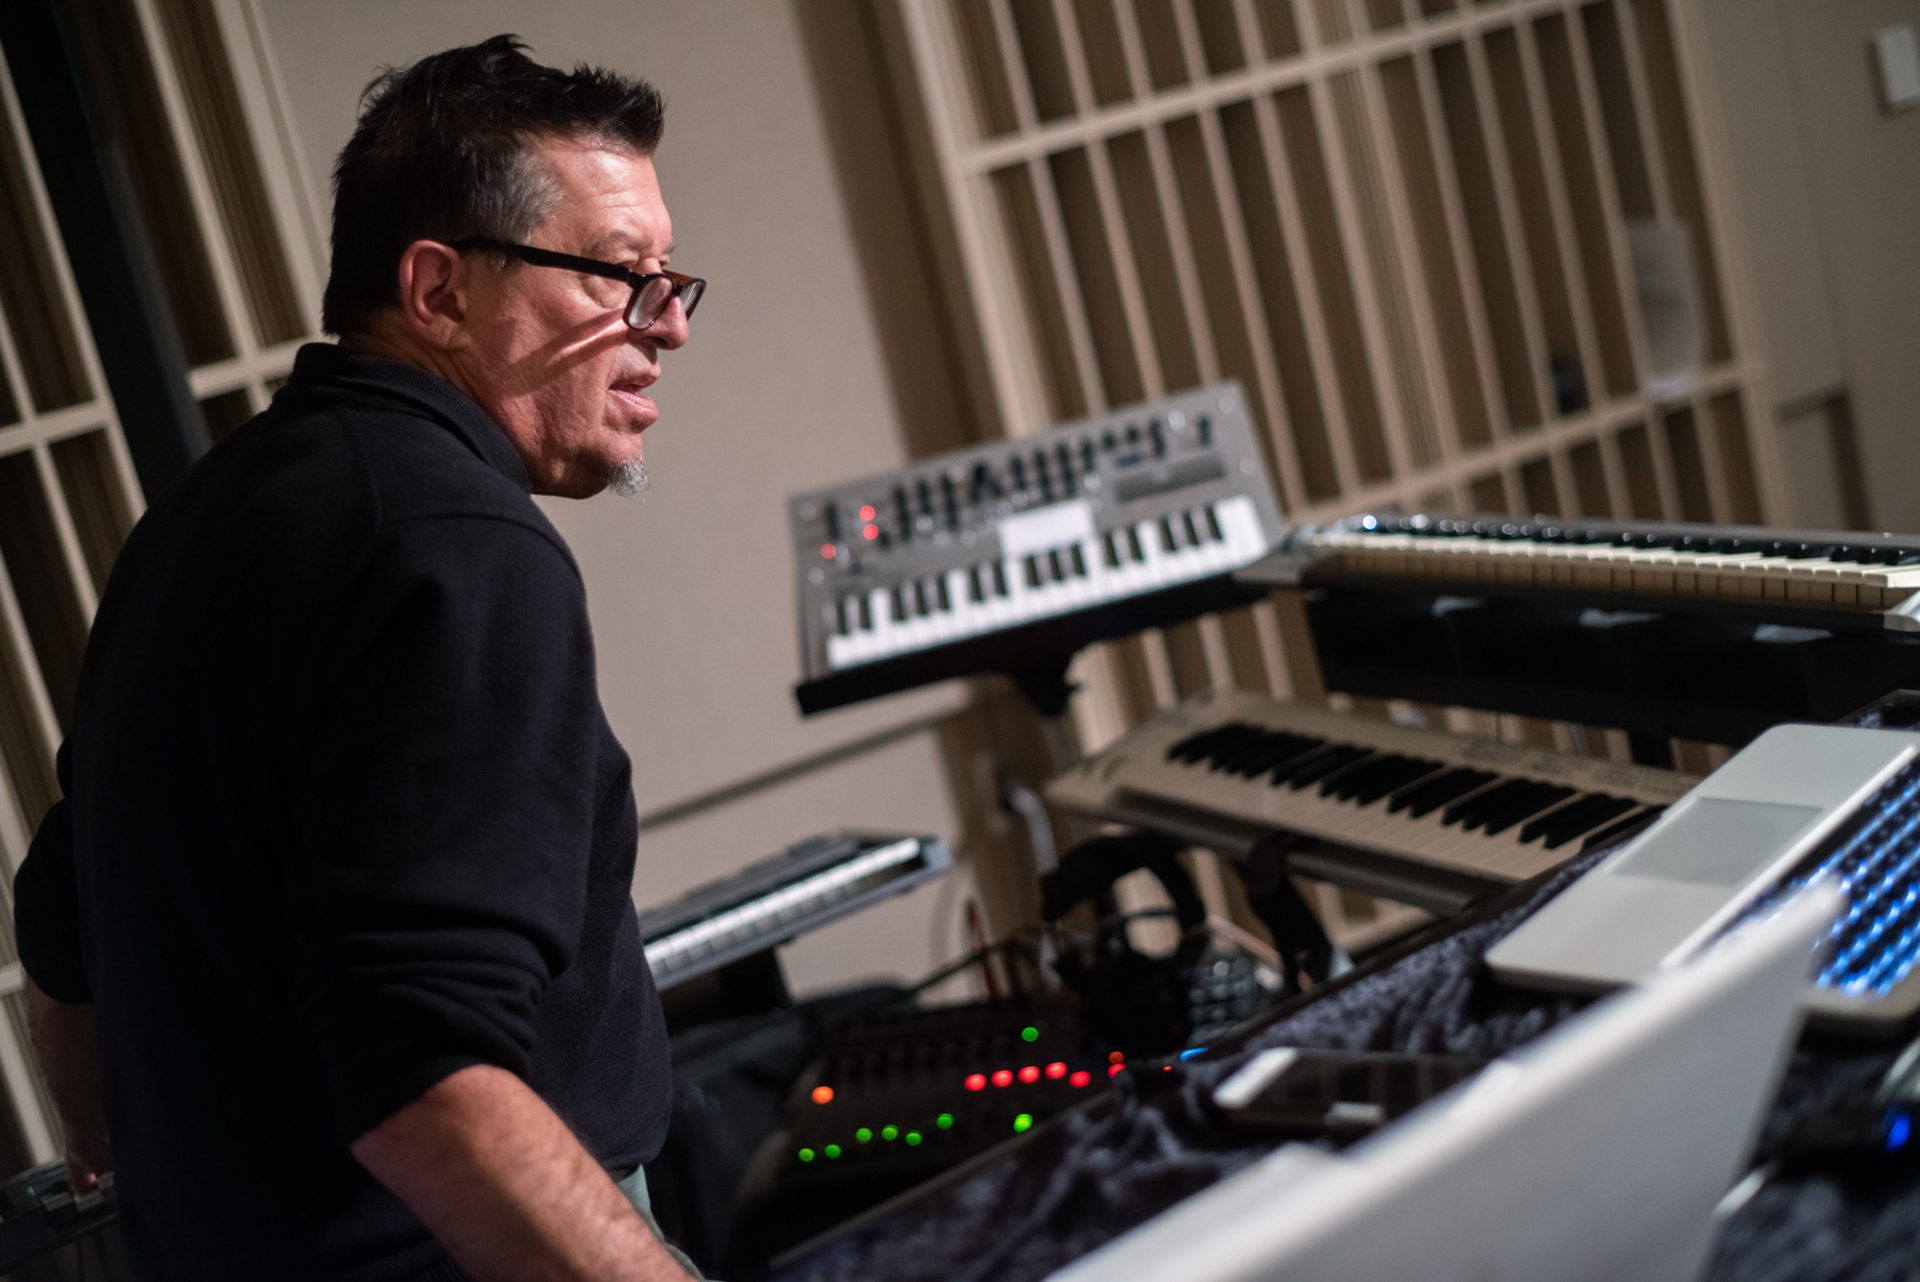 Ralph Diekemper playing keyboard and piano in the studio.